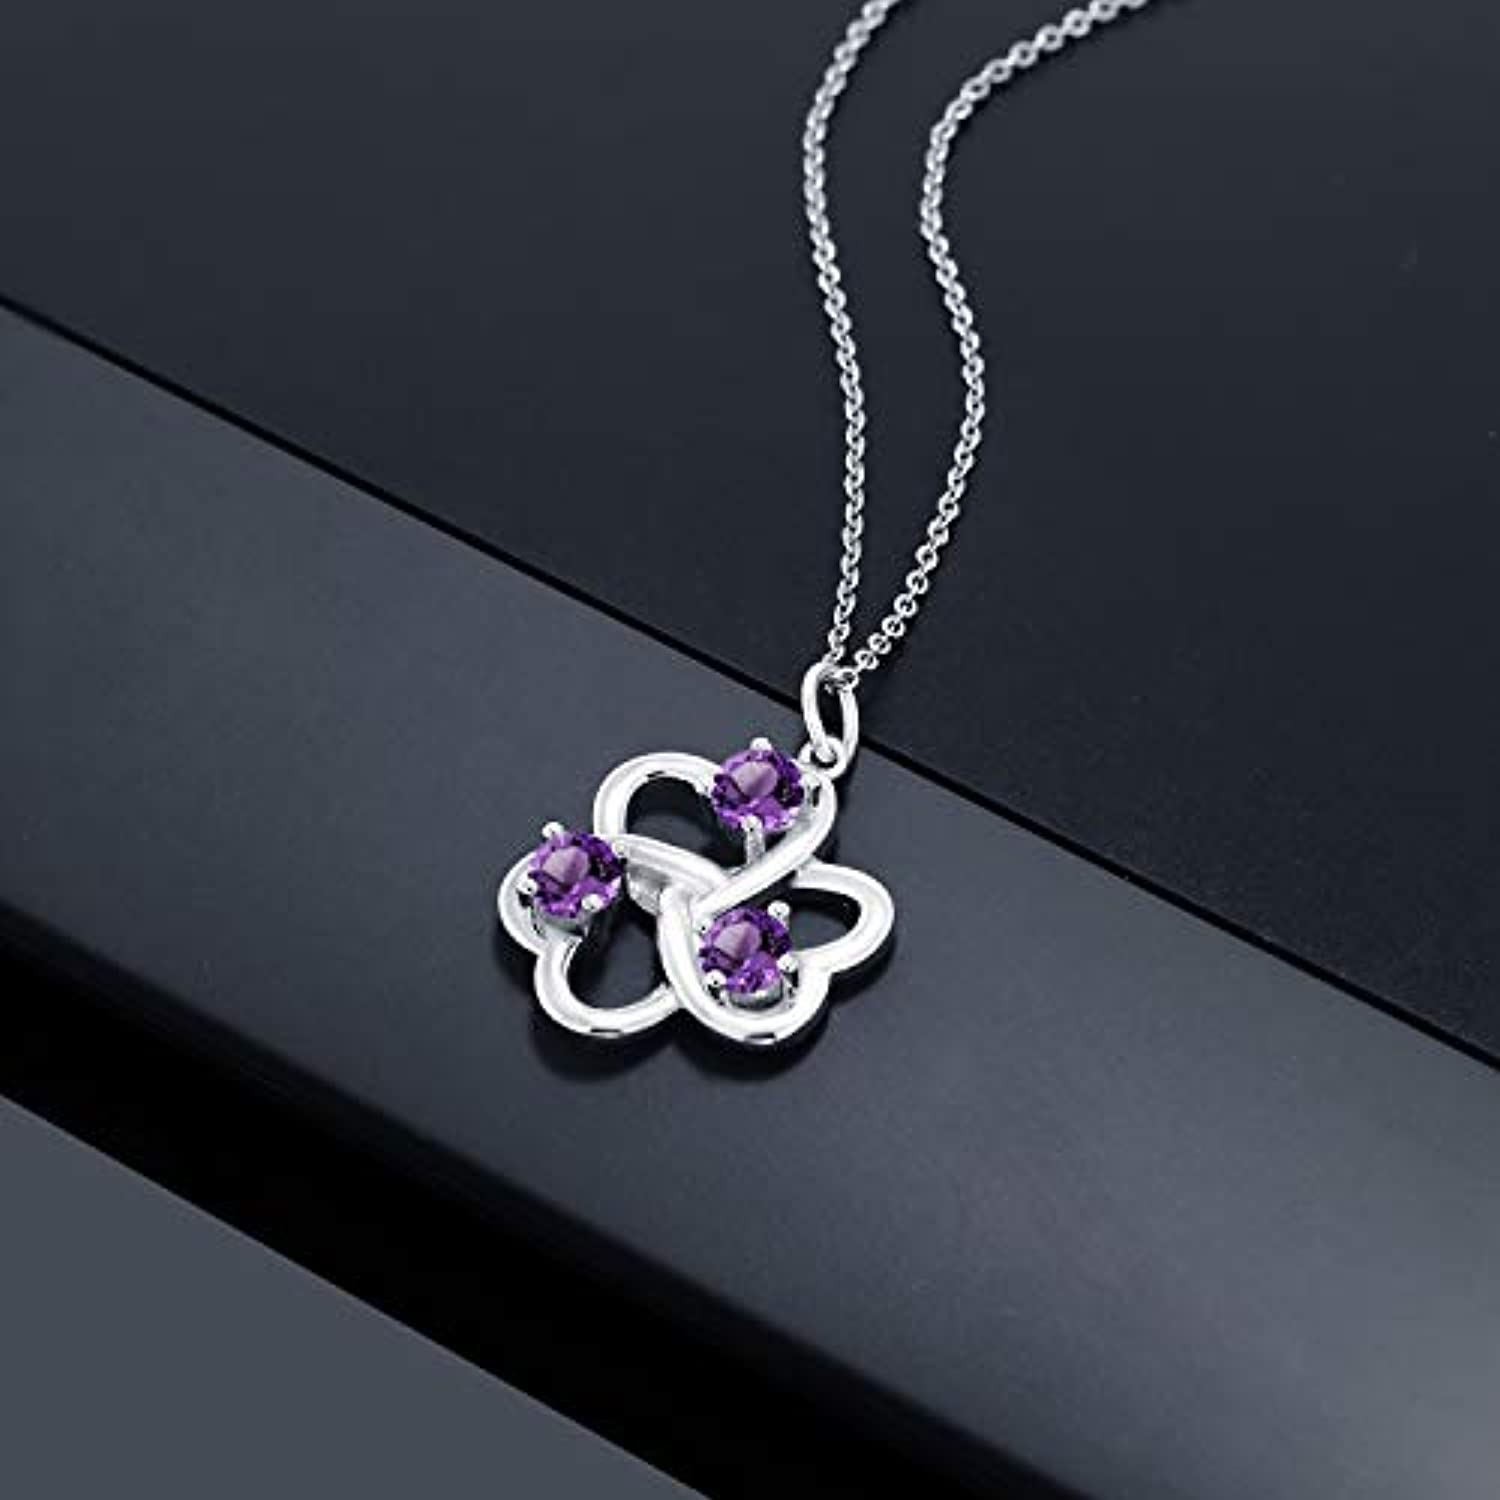 925 Sterling Silver Purple Amethyst 3 Hearts Interlock Pendant Necklace For Women (0.75 Ct Round With Silver Chain)